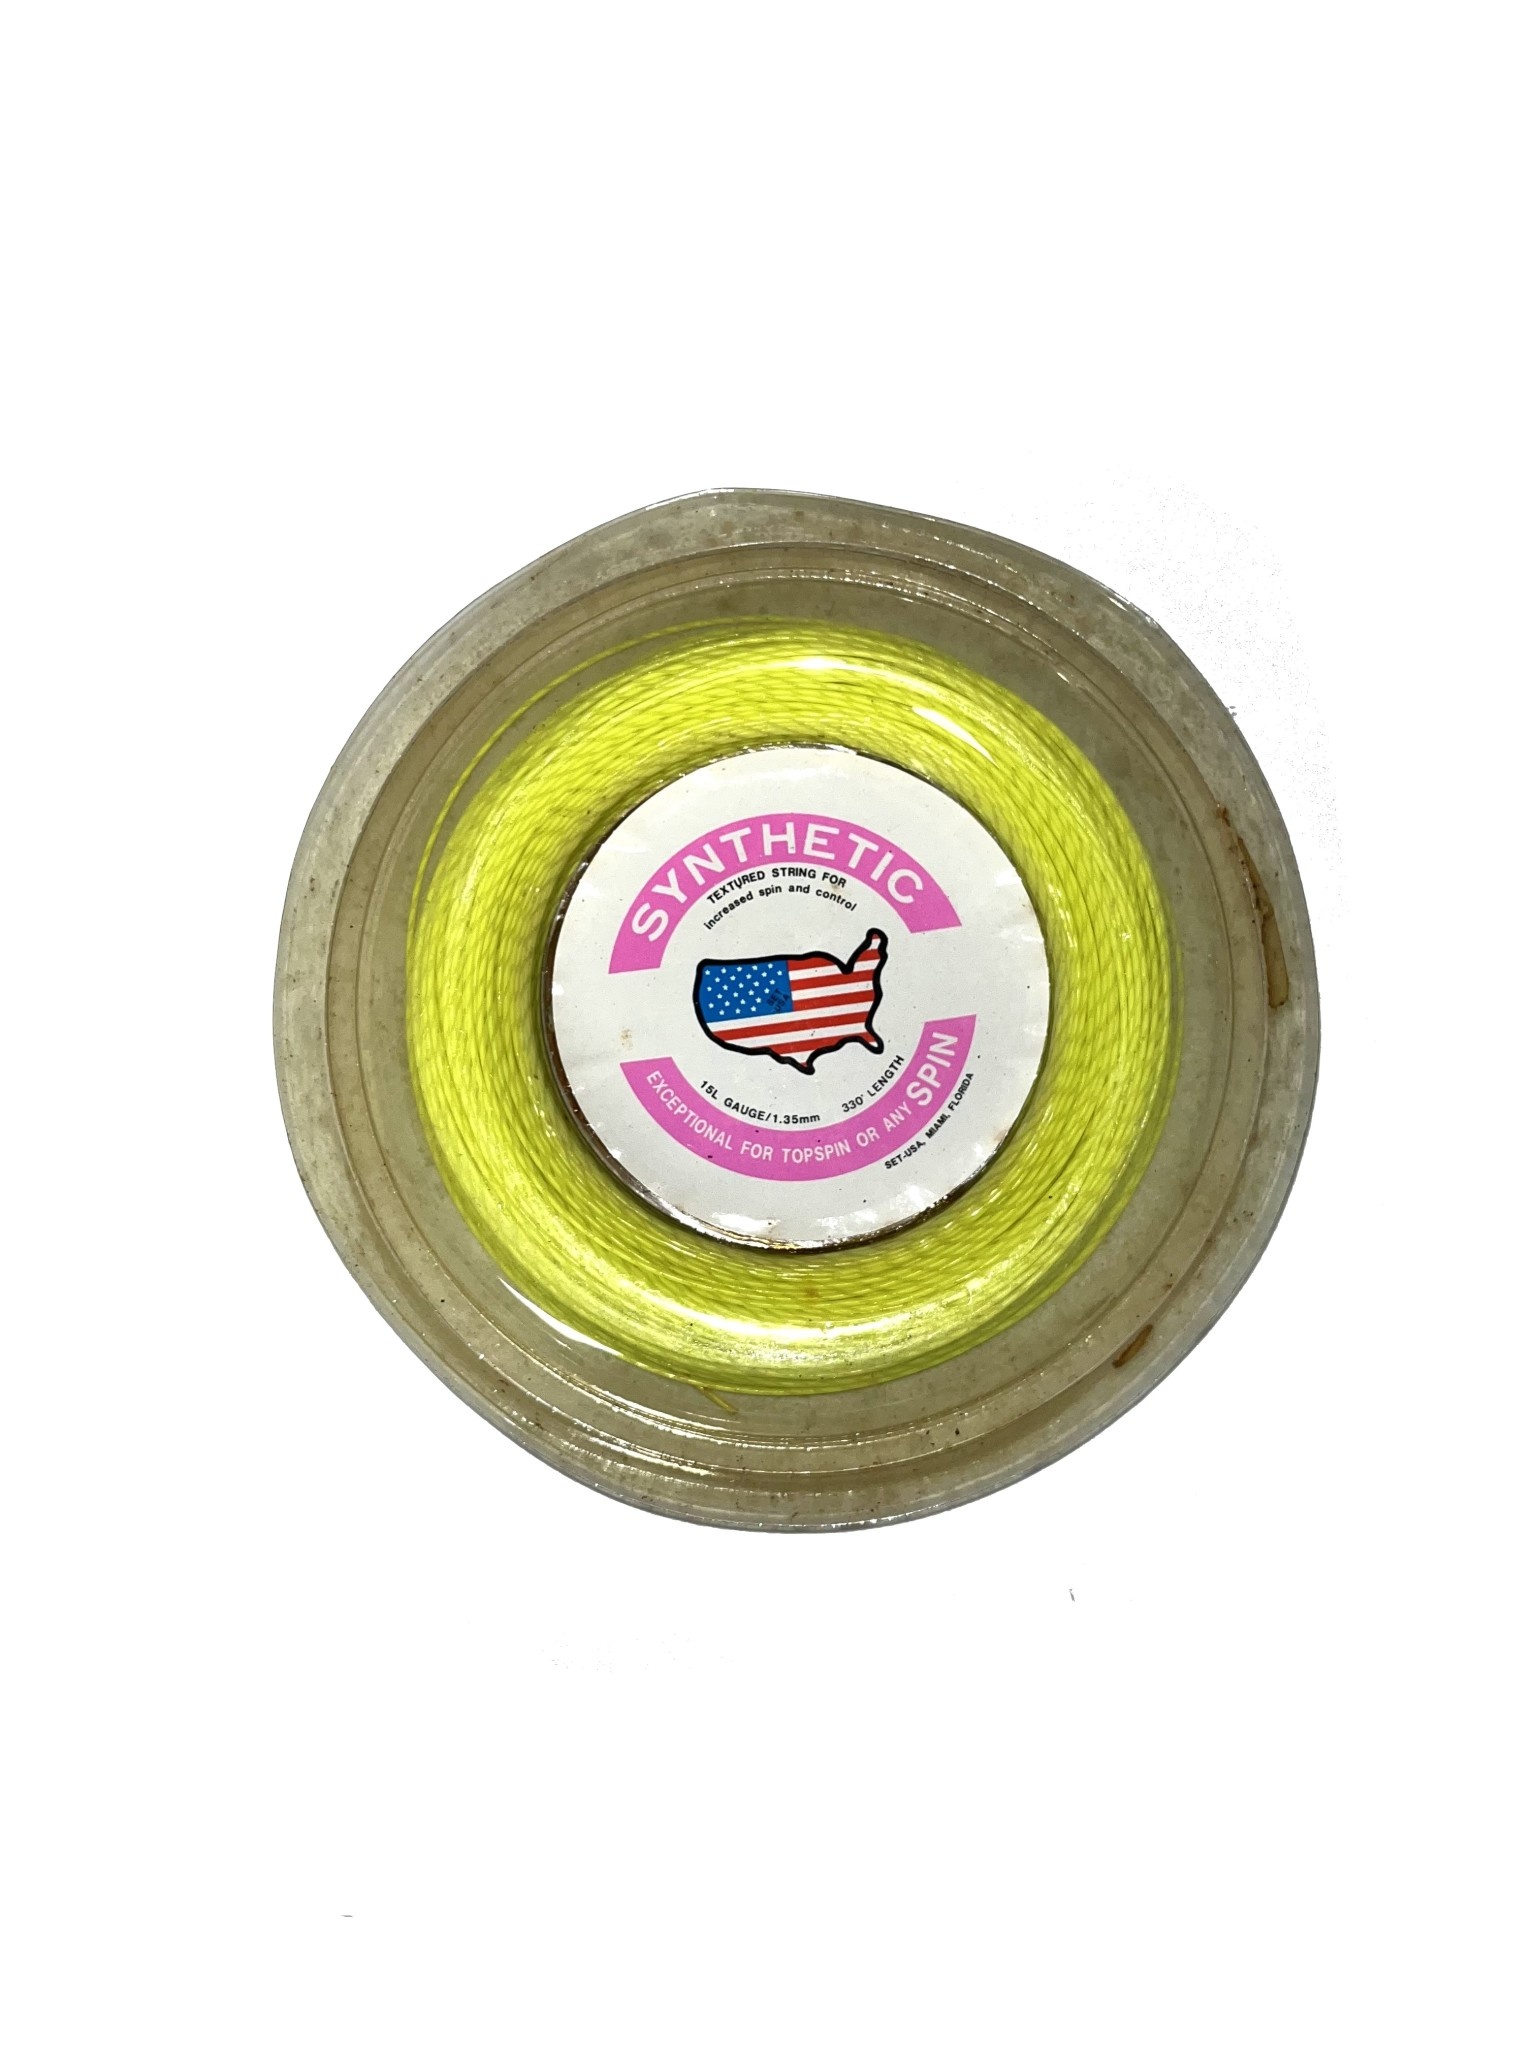 synthetic spin 17g 330' Reel - Game-Set-Match, Inc.